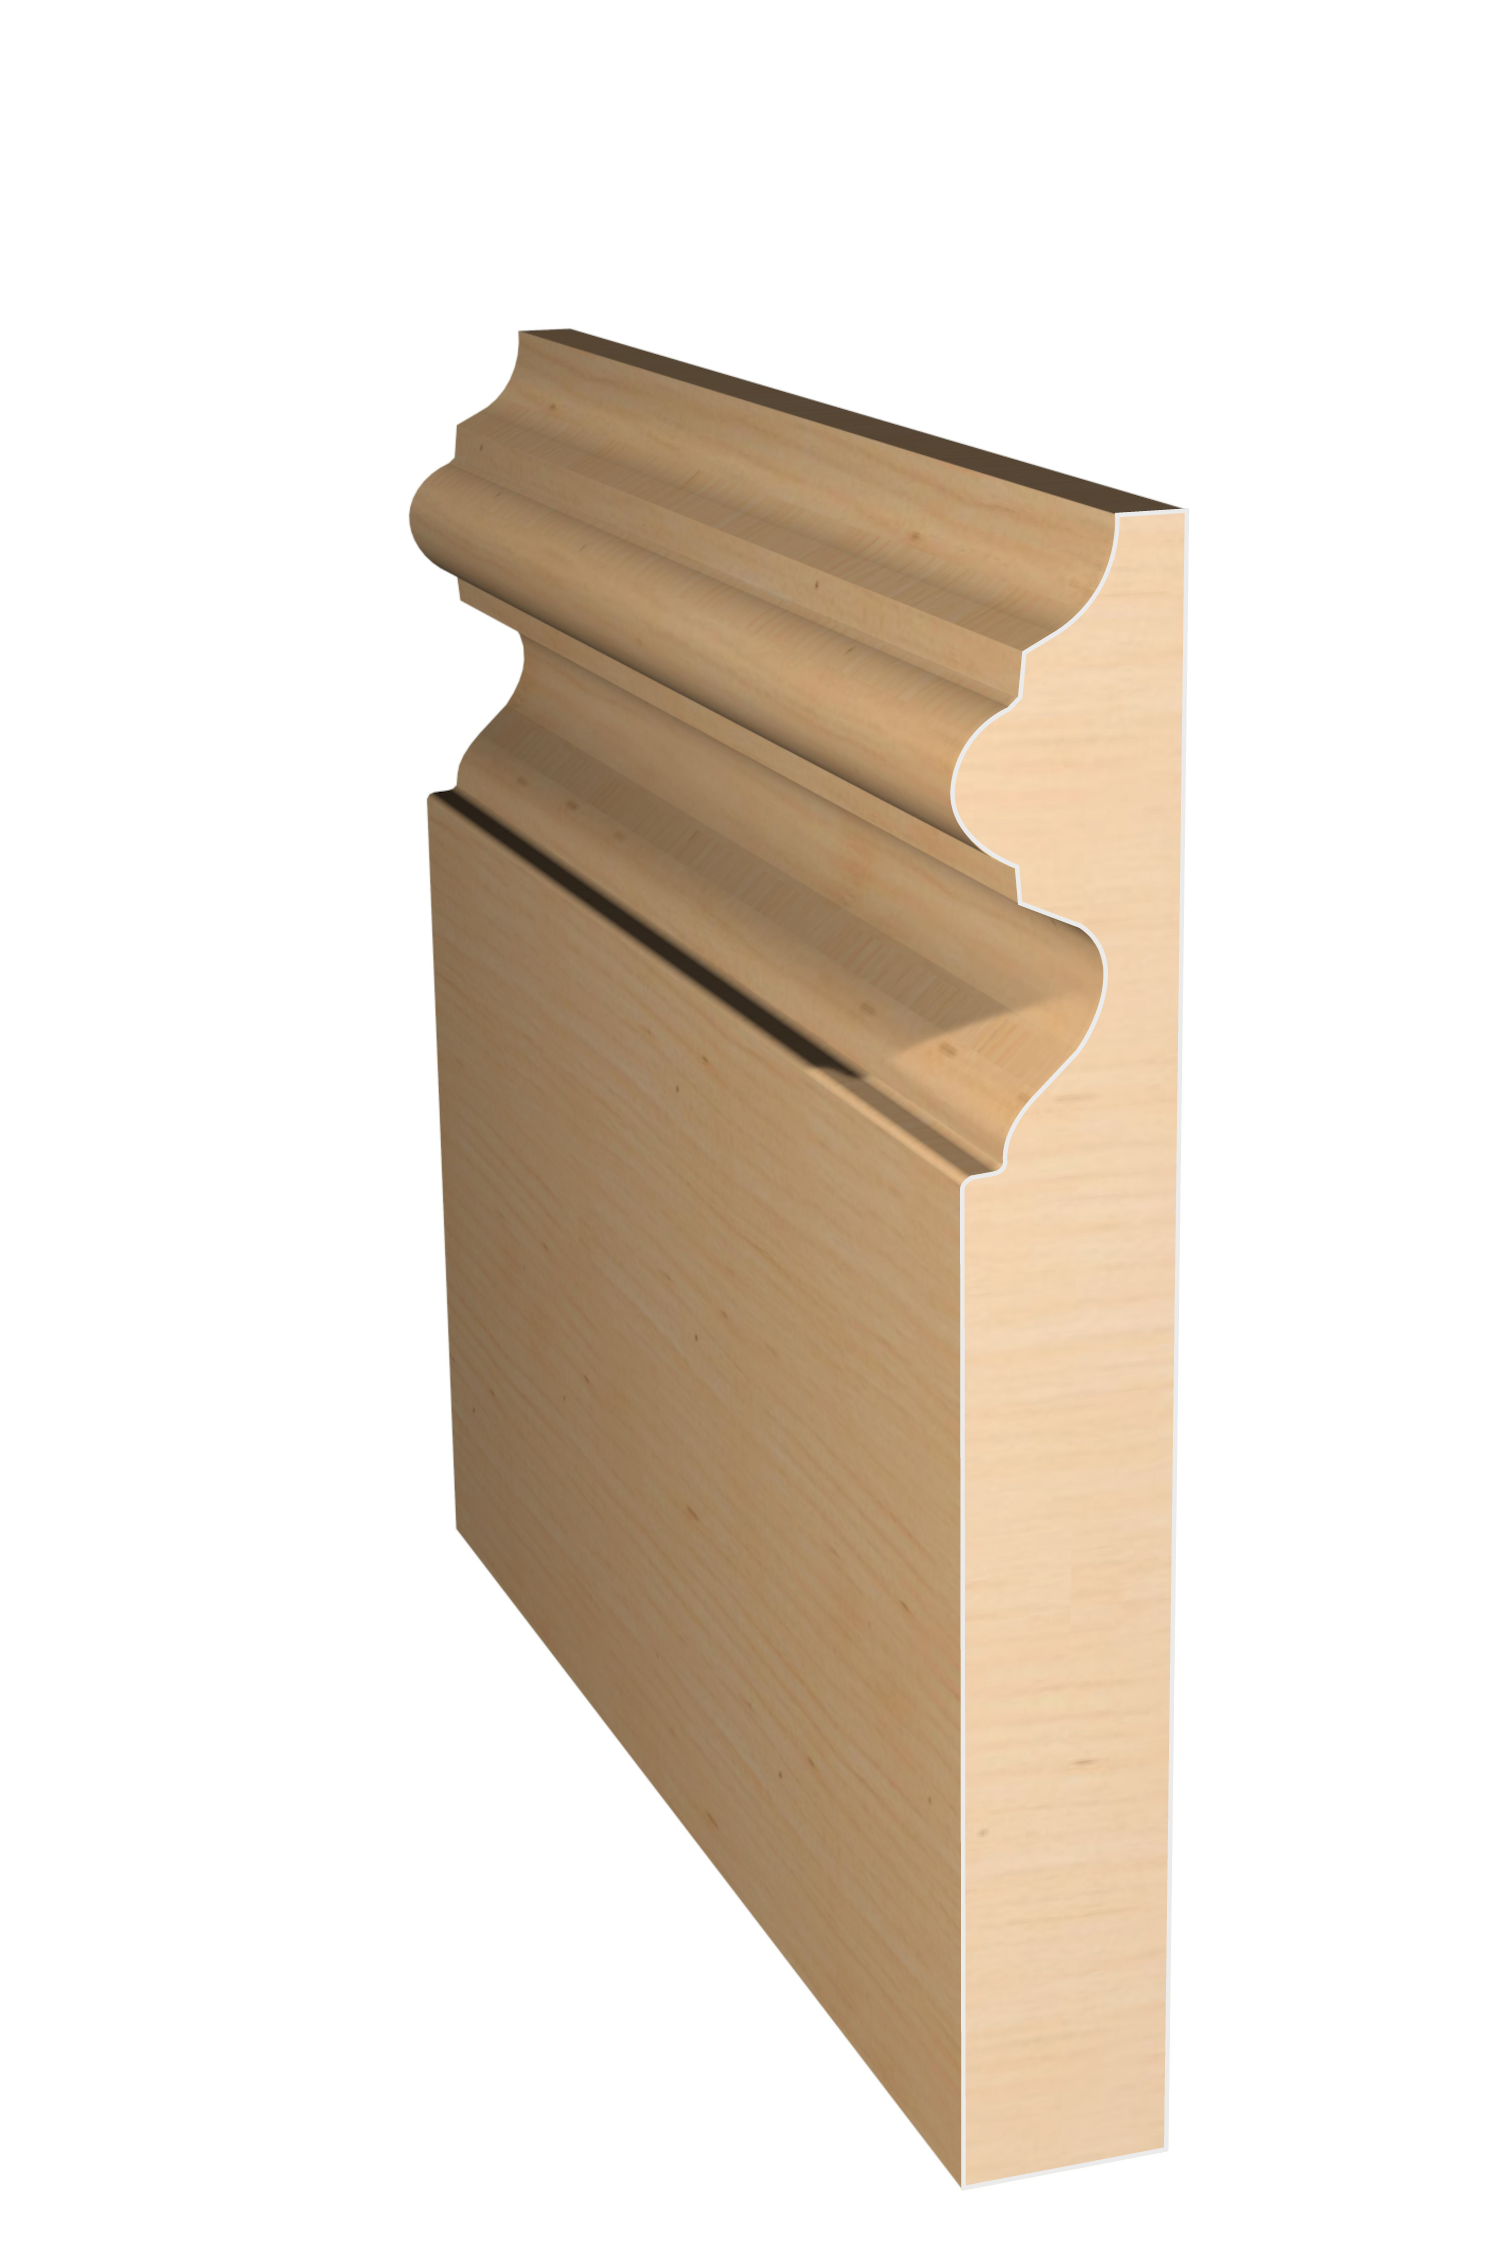 Three dimensional rendering of custom base wood molding BAPL514 made by Public Lumber Company in Detroit.